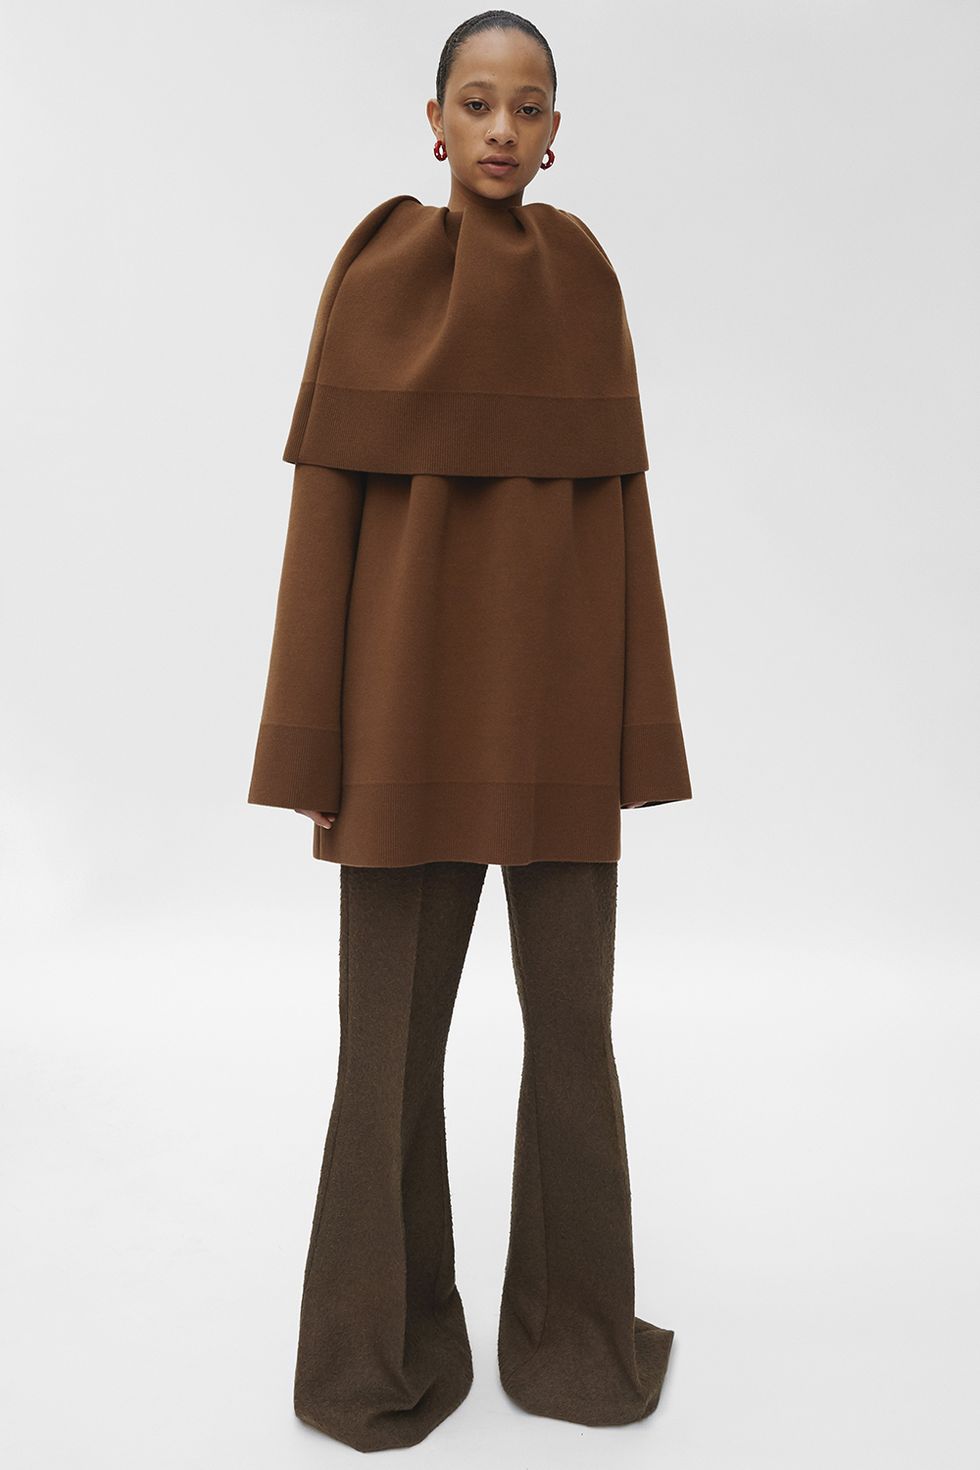 Clothing, Outerwear, Standing, Brown, Coat, Costume, Overcoat, Mantle, Cape, Neck, 